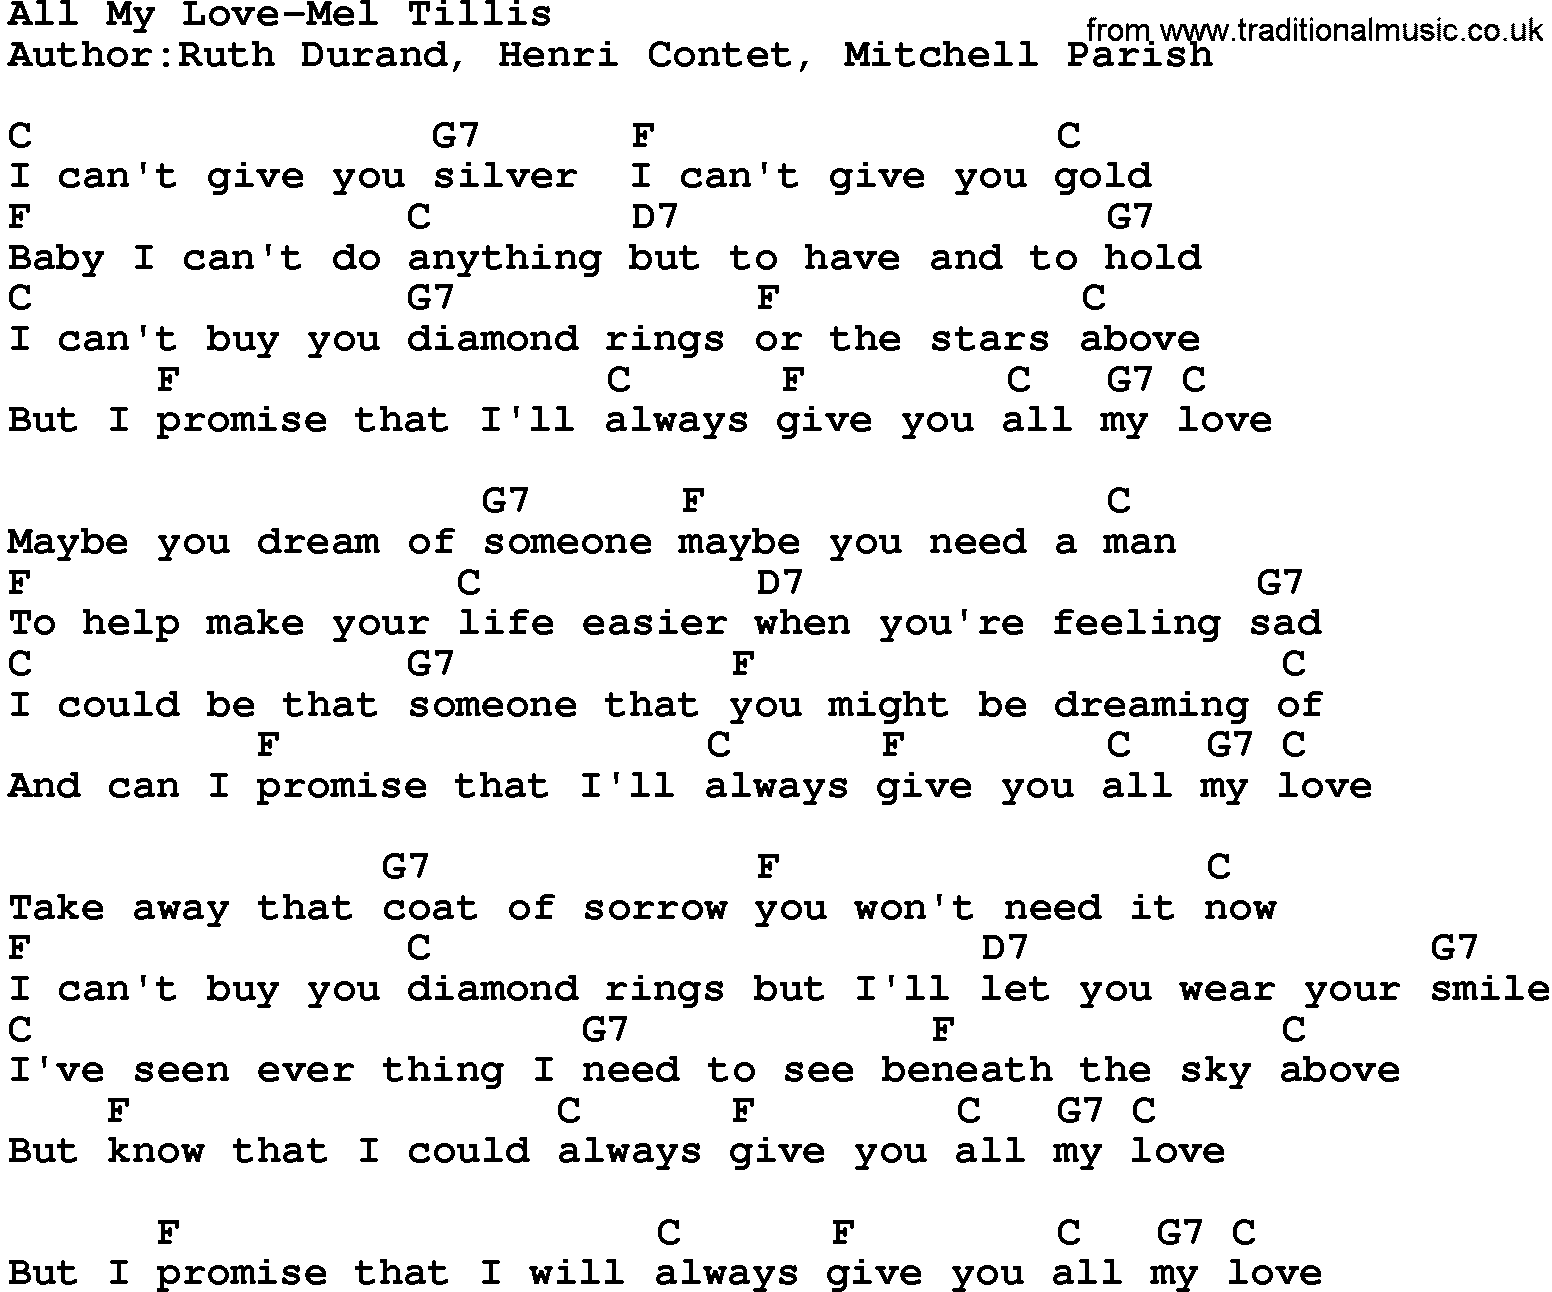 Country music song: All My Love-Mel Tillis lyrics and chords